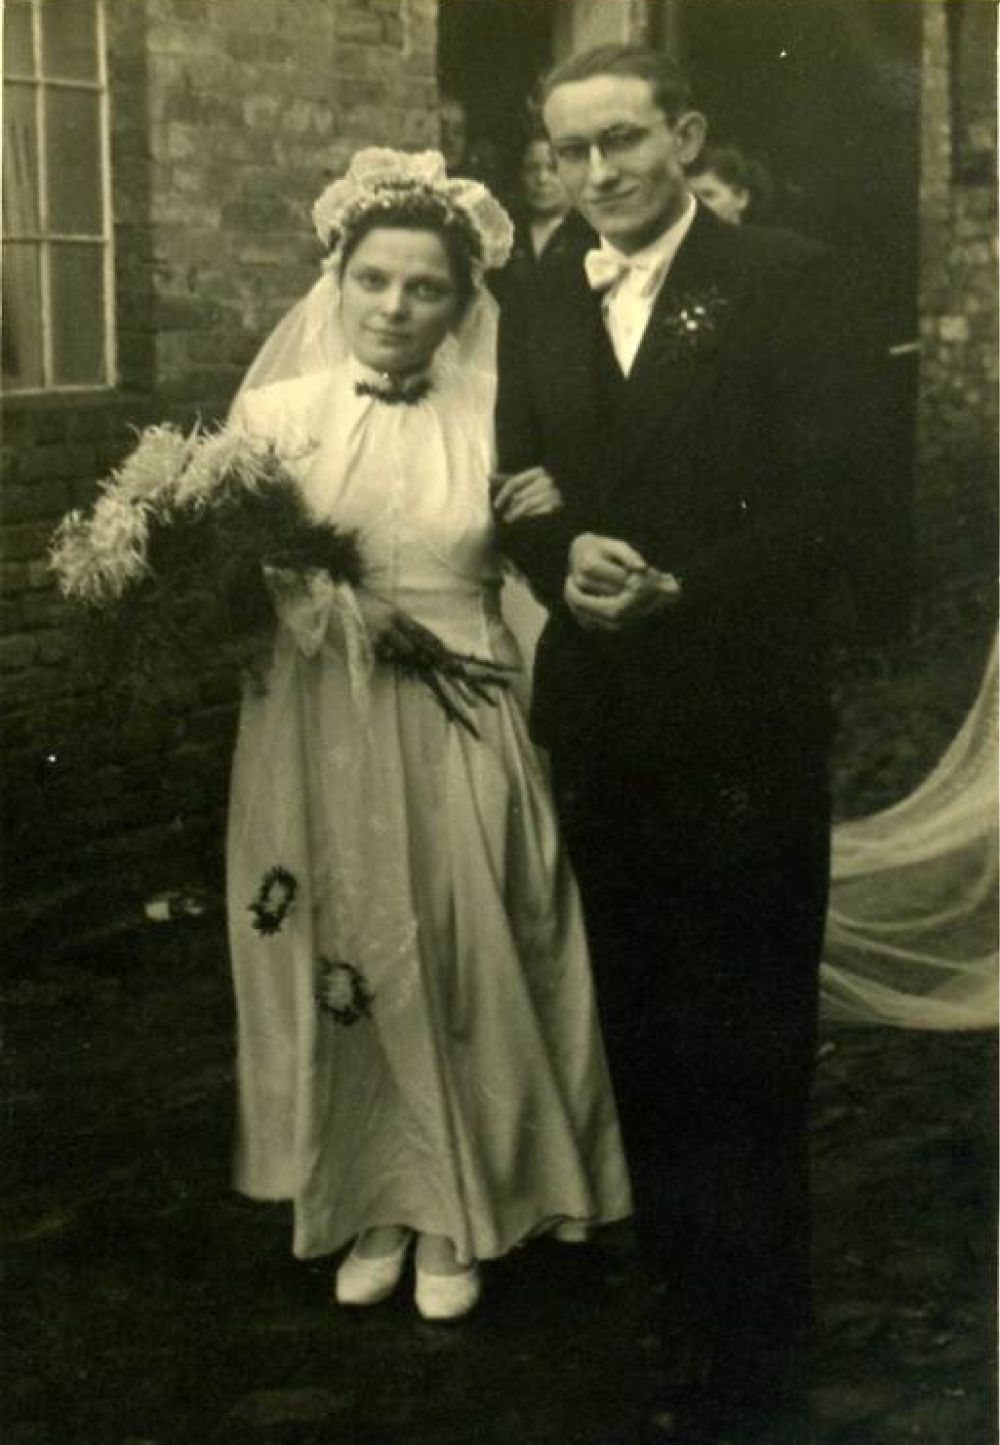 Fritz and Ruth Hartmann getting married in 1954.